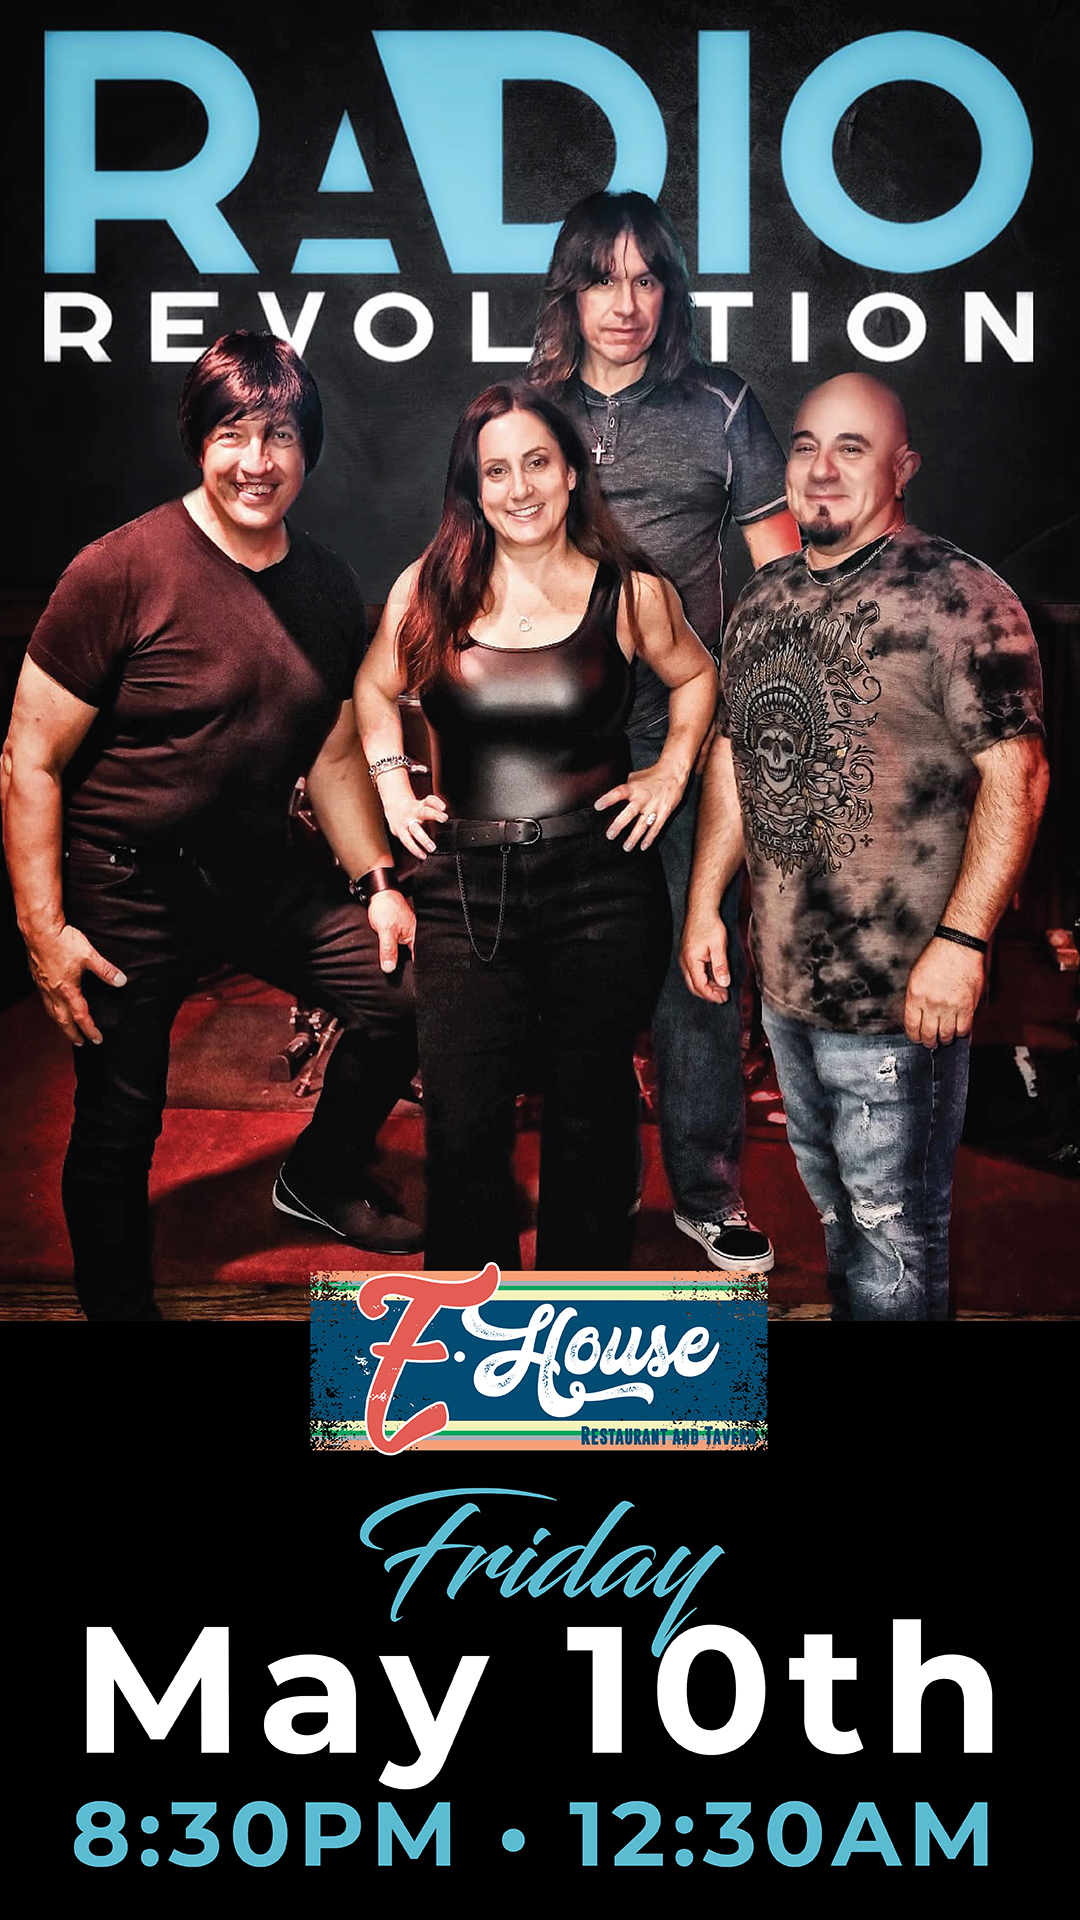 Band of four members posing in front of a "radio" banner, promoting a live performance at e-house entertainment on may 10th from 8:30 pm to 12:30 am.